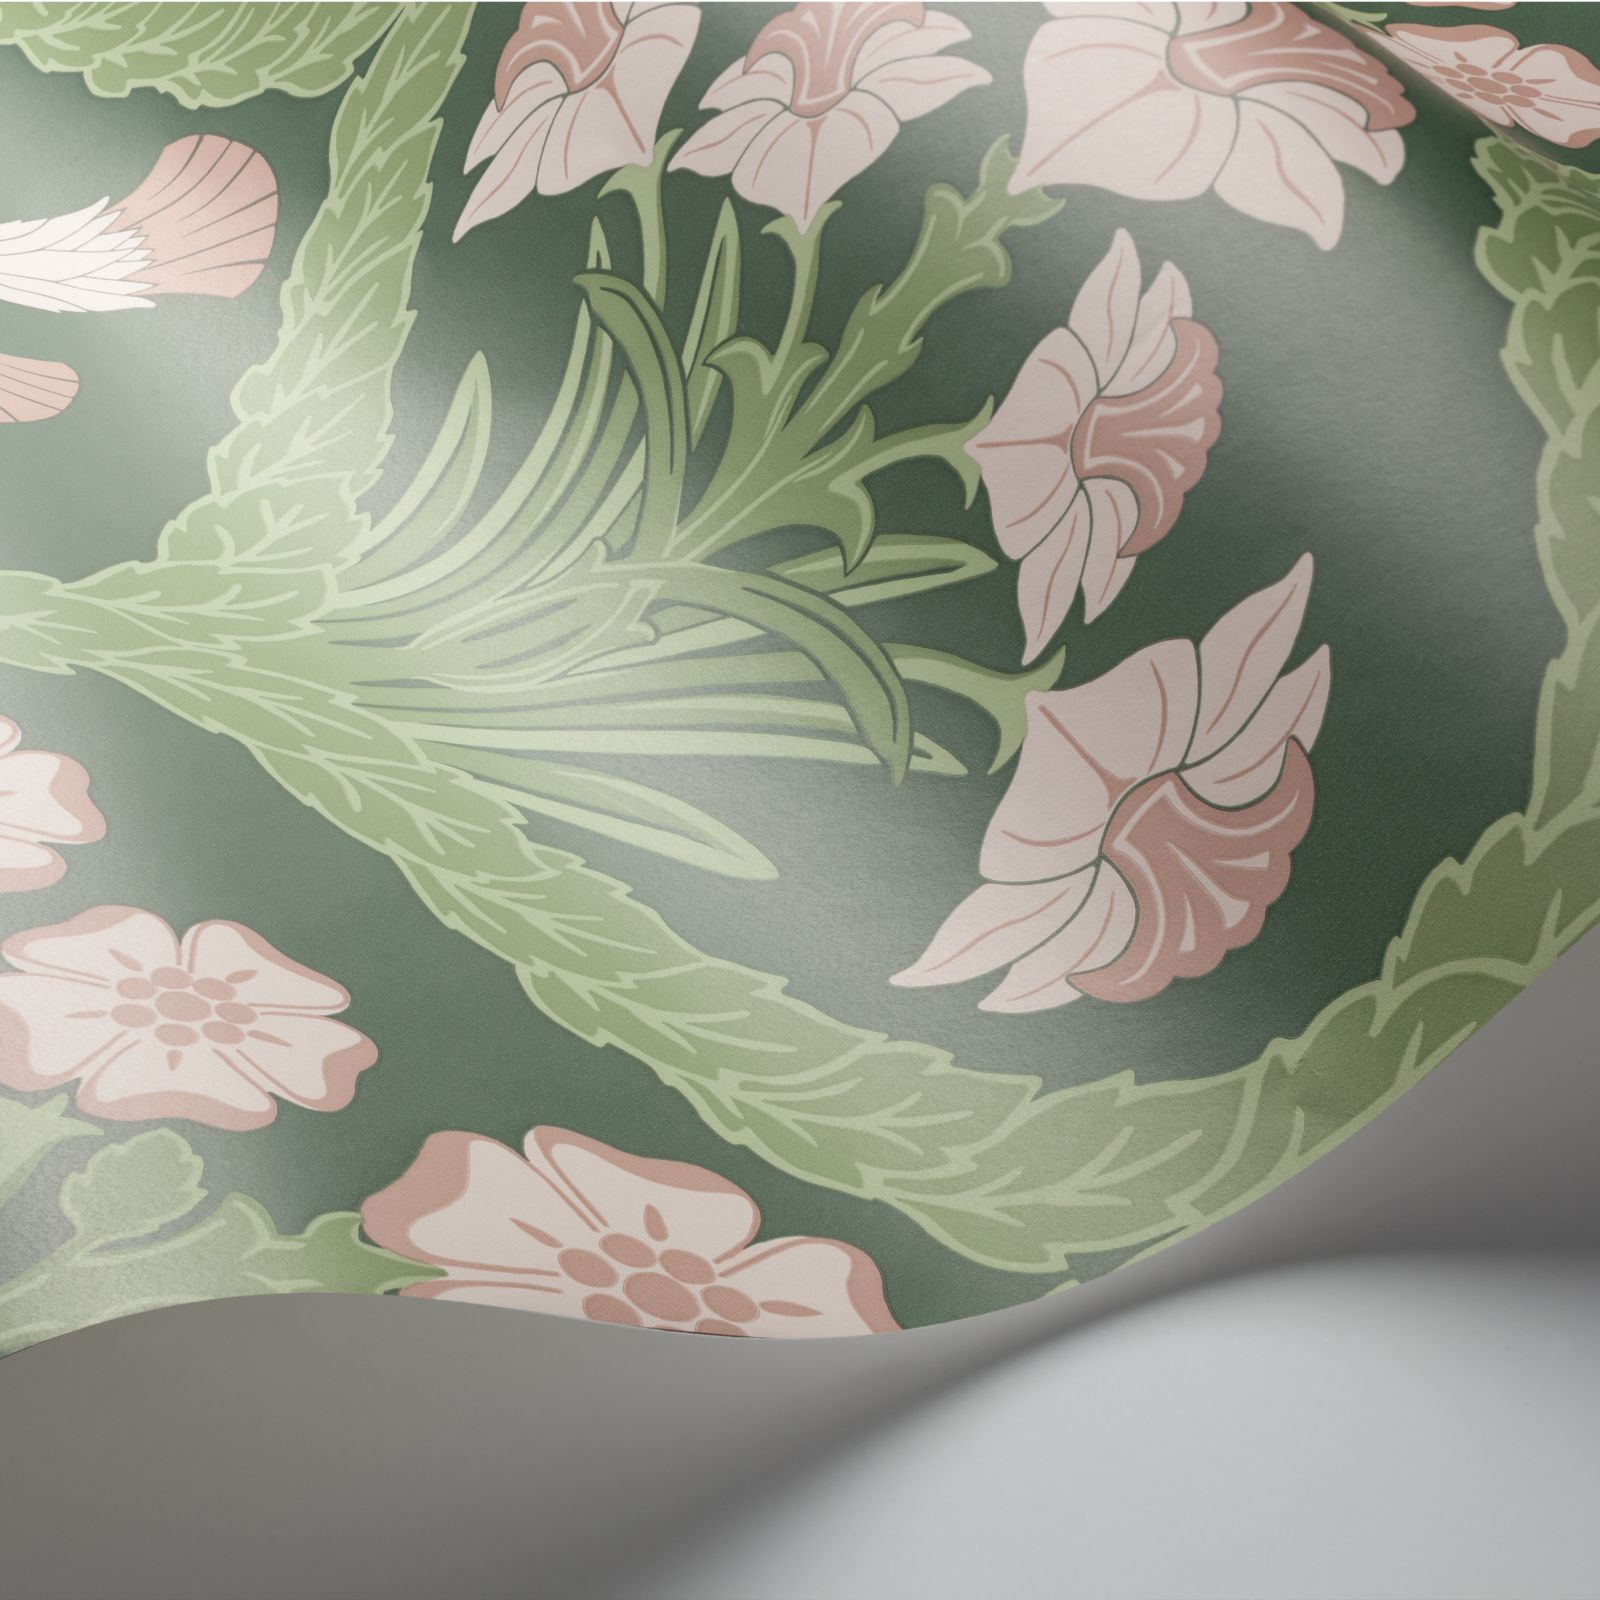 Floral Kingdoms wallpaper in a choice of 4 colourways